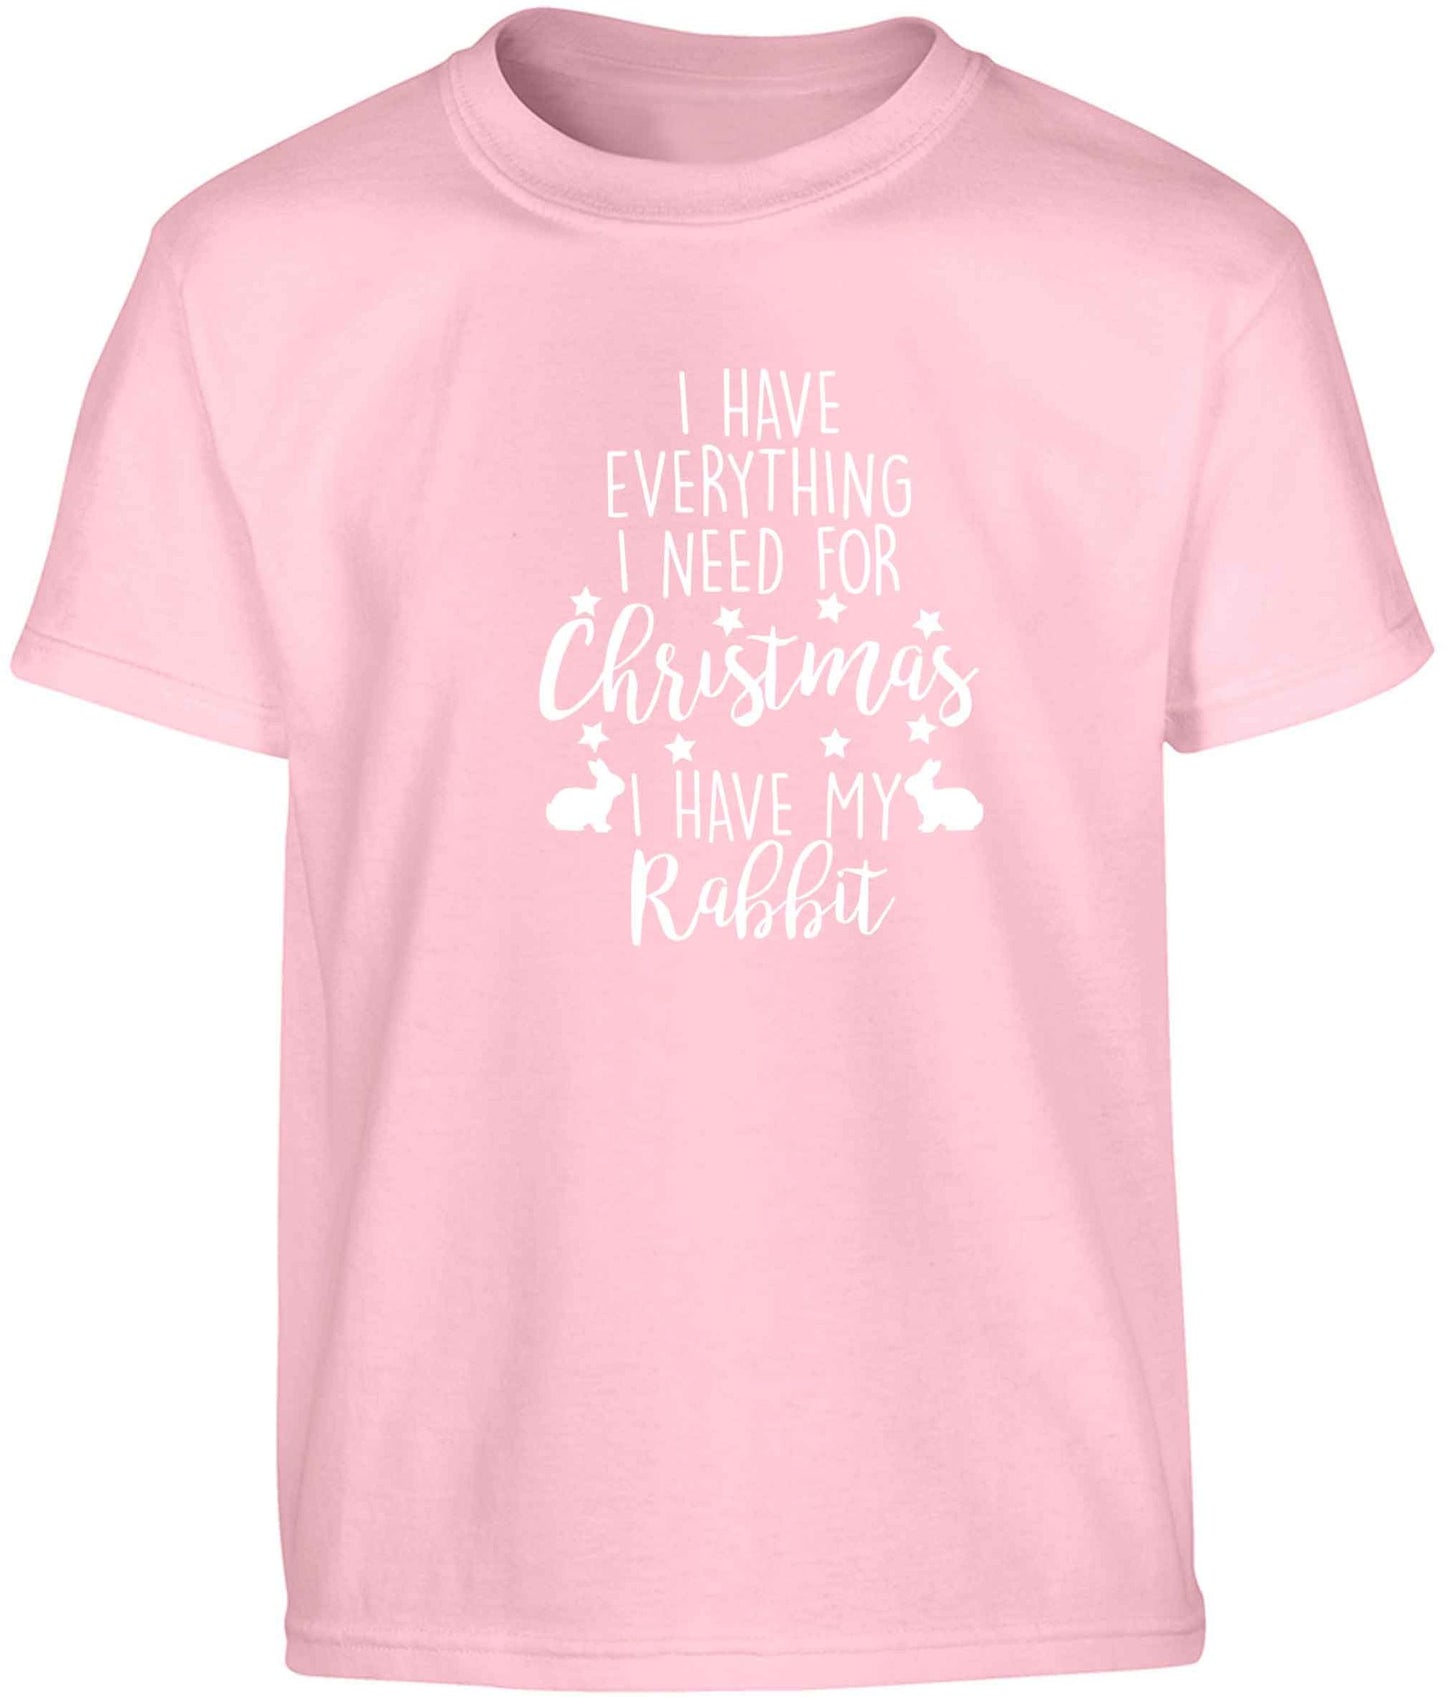 I have everything I need for Christmas I have my rabbit Children's light pink Tshirt 12-13 Years